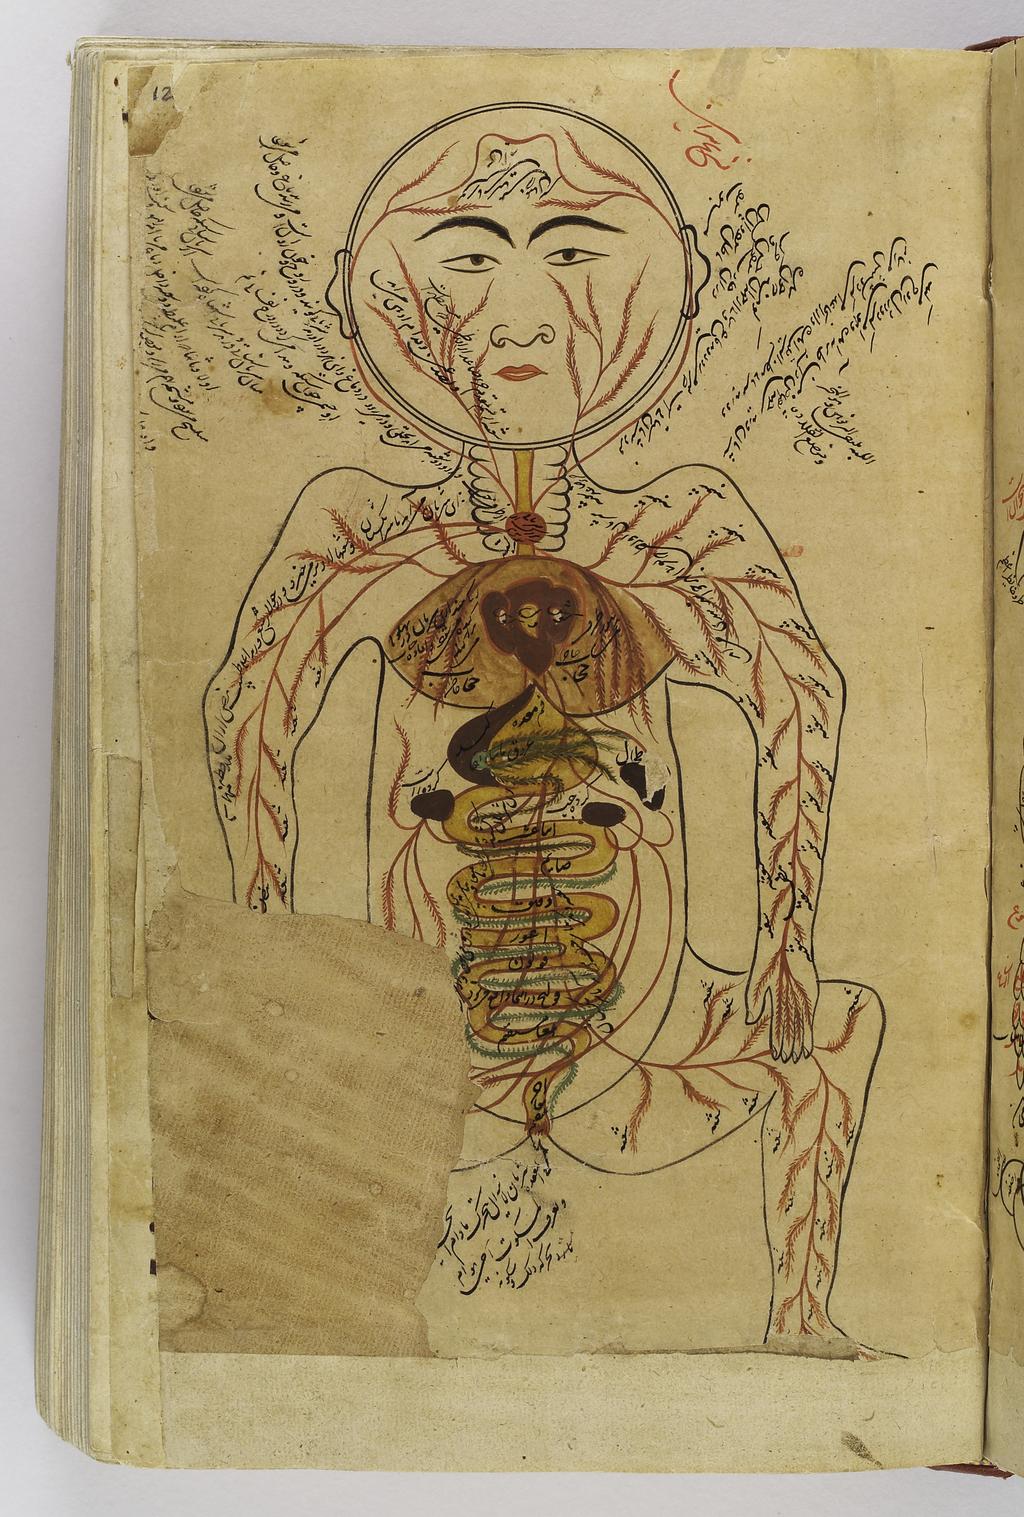 Supporting Question 1 Featured Source B Drawing of viscera etc., Avicenna, Canon of Medicine. Wellcome Library, London.